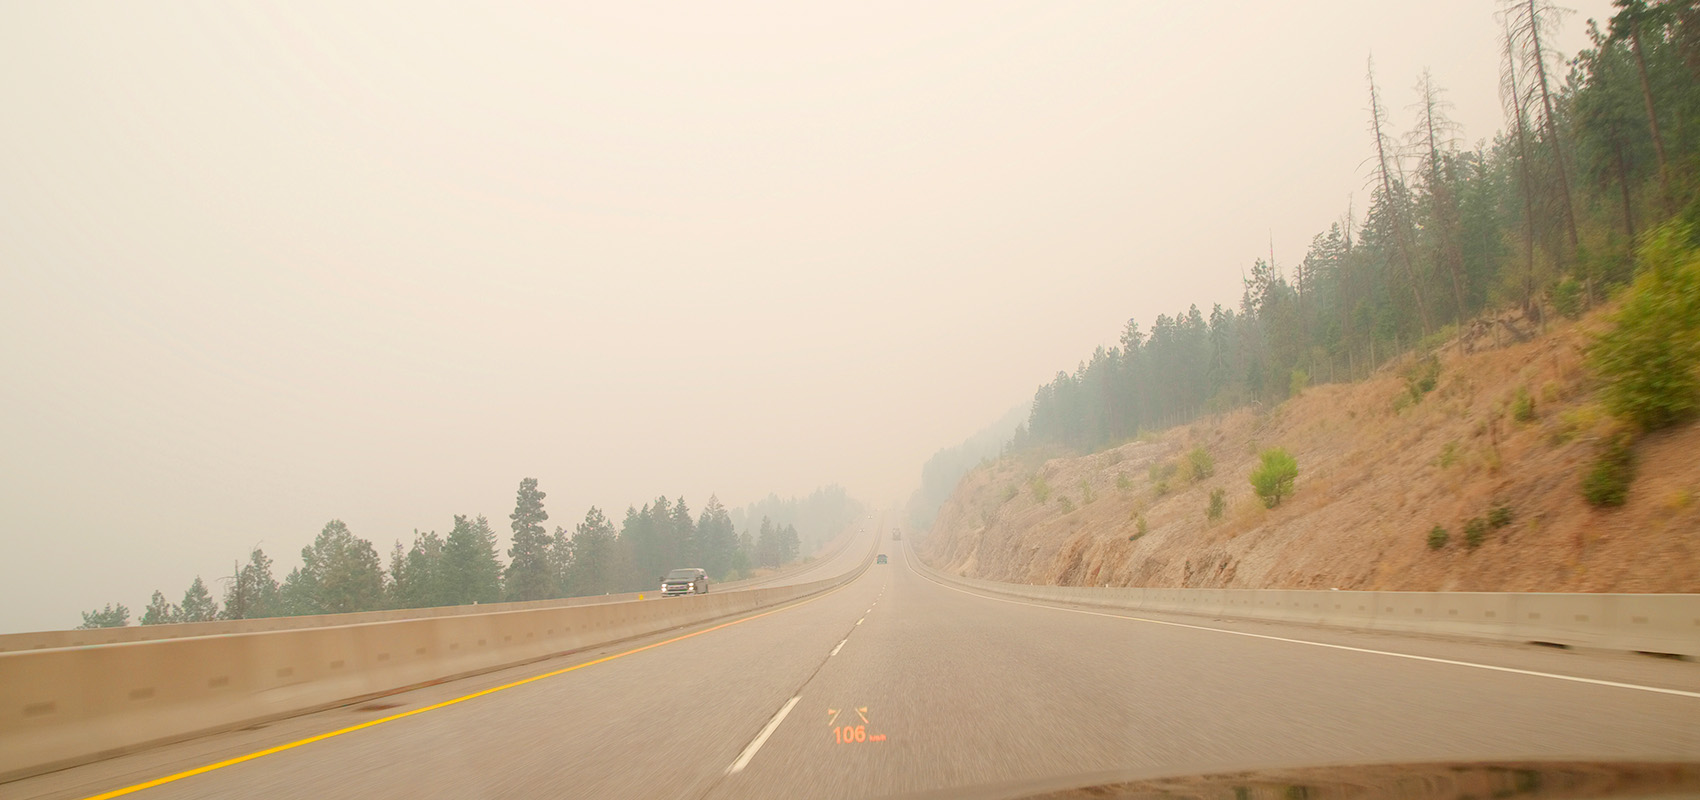 View down highway with smoky skies